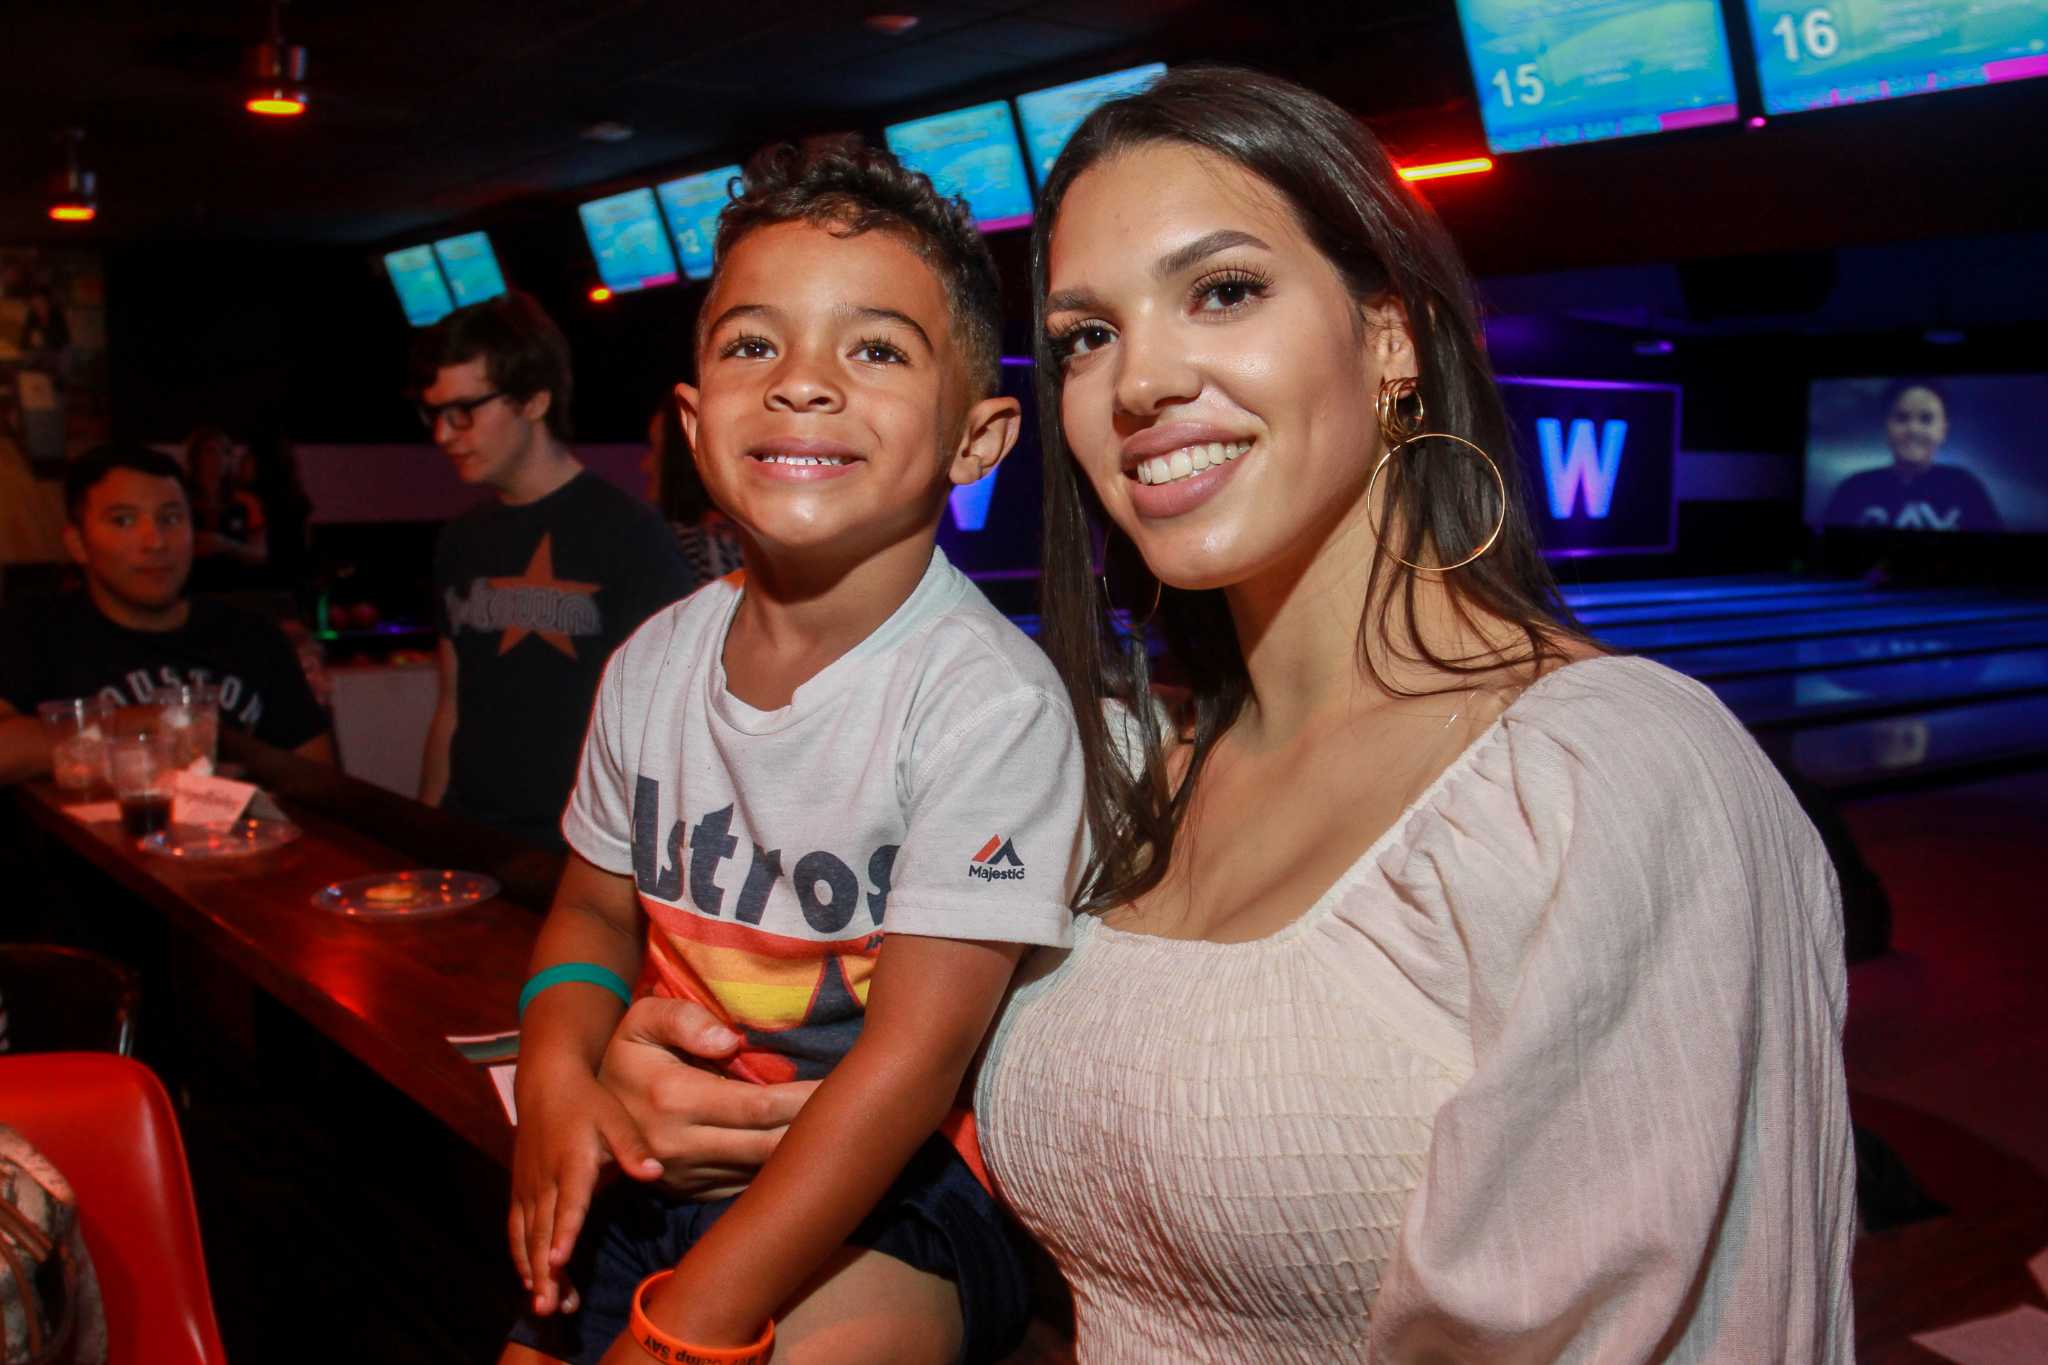 George Springer All Star Bowling Benefit Raises More Than $250K